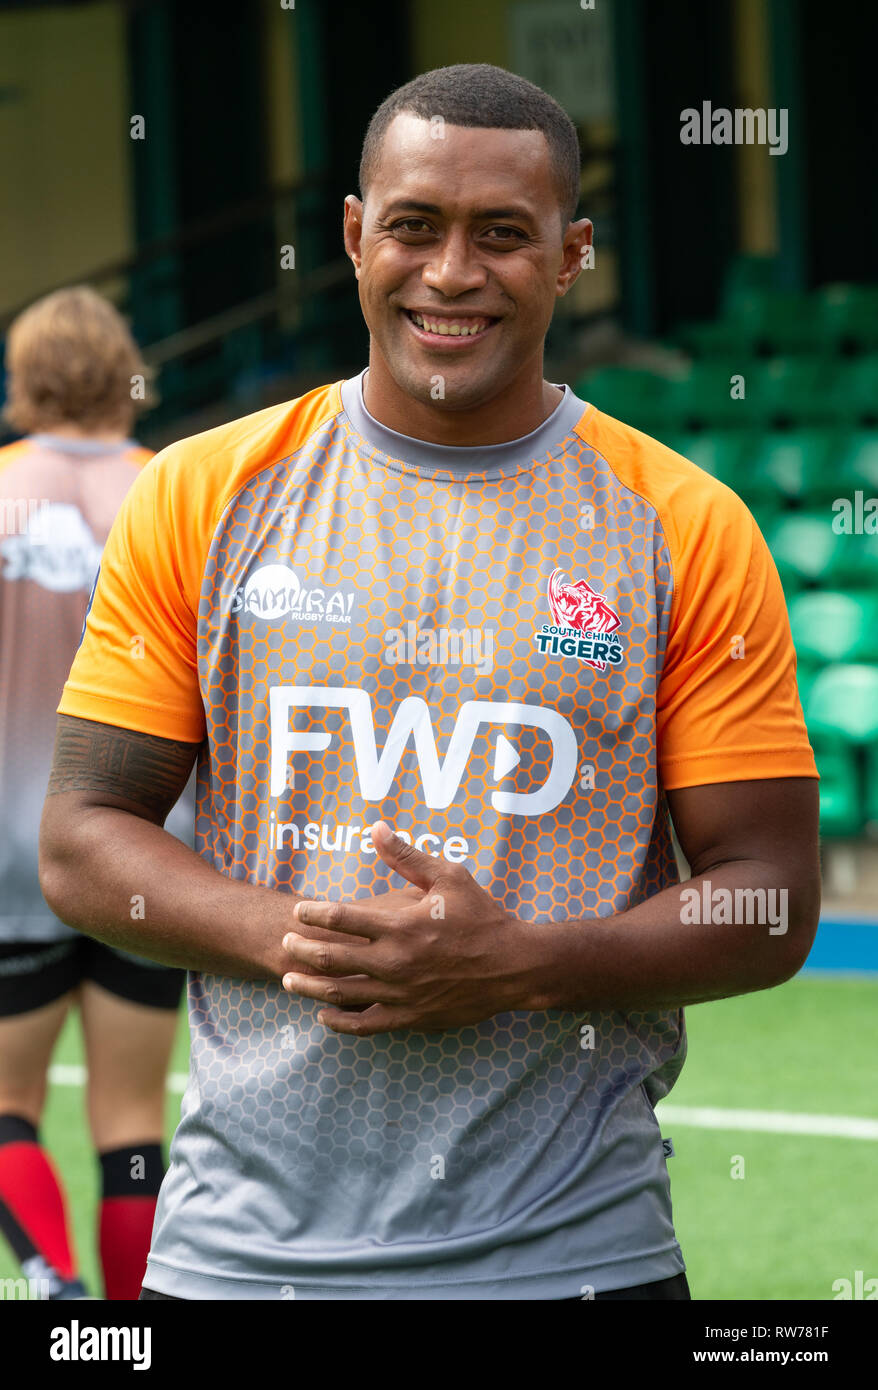 HONG KONG, HONG KONG SAR, CHINA. MARCH 5th 2019. Fiji's Samisoni Viriviri. Launch of the South China Tigers professional rugby team to play in the Global Rapid Rugby tournament. Fiji's Samisoni Viriviri joins the FWD South China Tigers, a new professional team playing in the Global Rapid Rugby. Viriviri, a gold medalist for 7's at the Rio Olympics, has played for French teams Montpelier and Montauban but is most know at Sevens player of the year 2014. Viriviri looks forward to the new professional Rapid Rugby tournament with upcoming Asian and Australian showcase matches. Rapid Rugby was conce Stock Photo